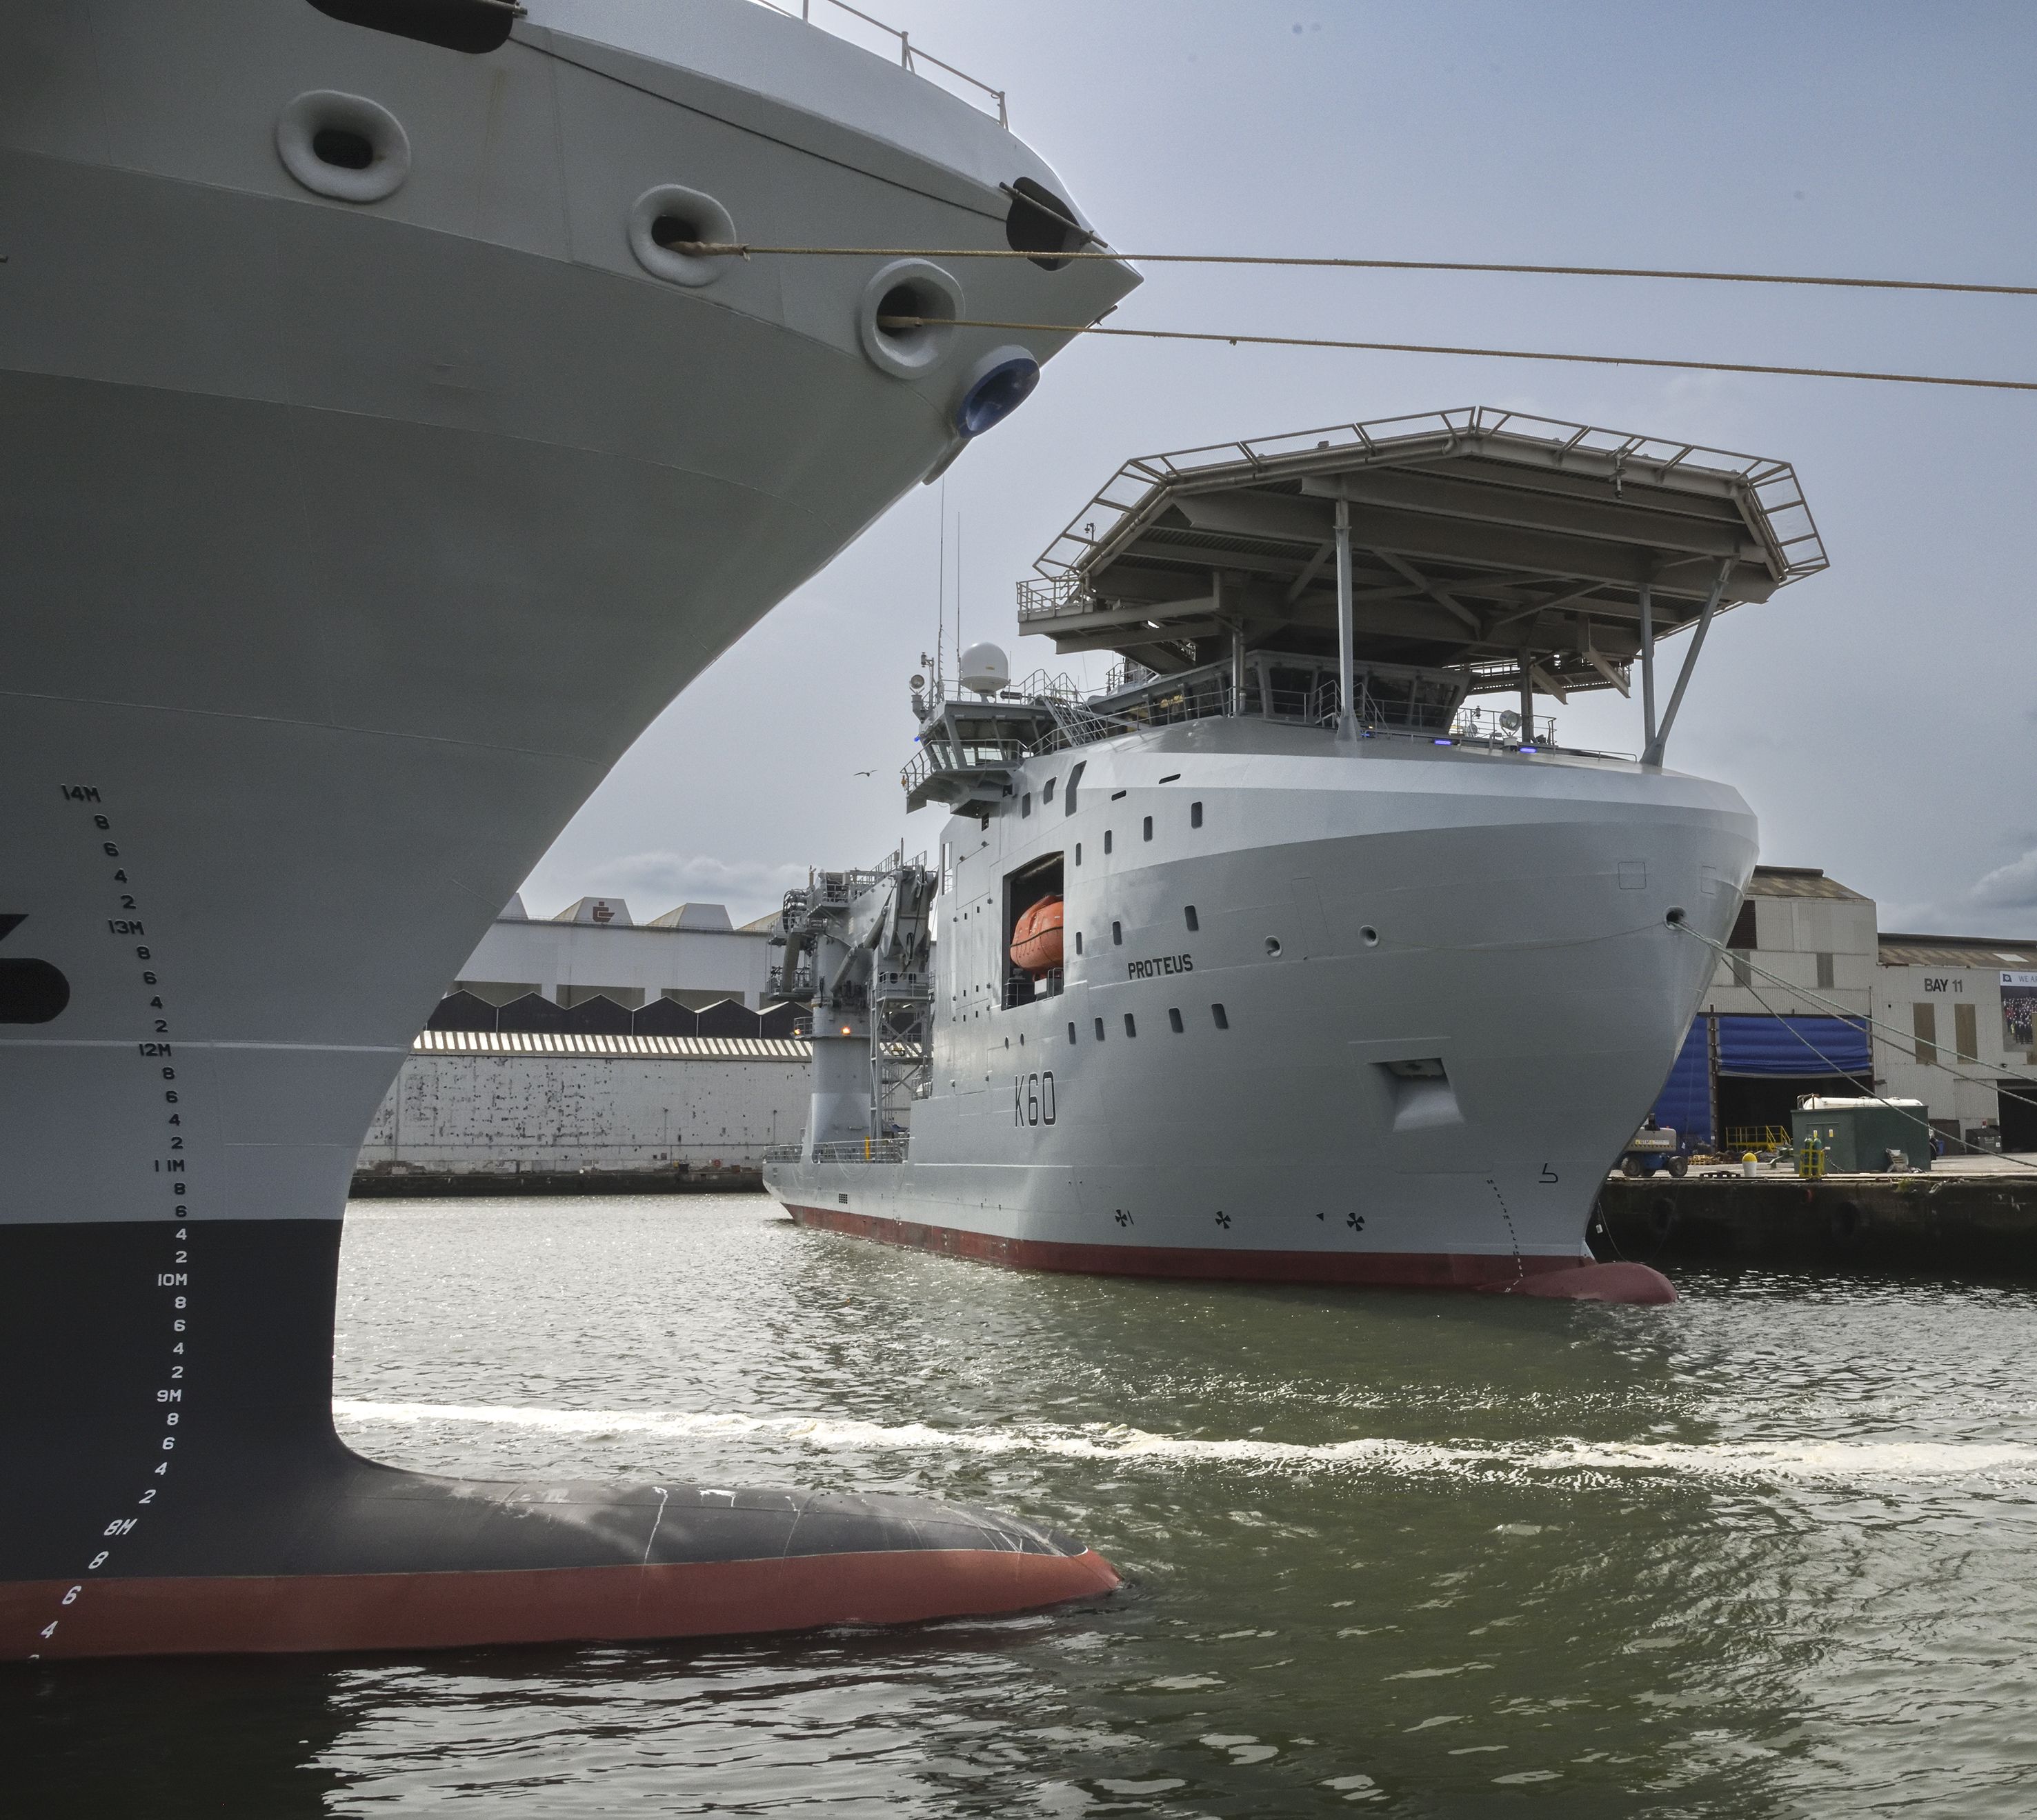 The RFA Proteus ship sits in the water